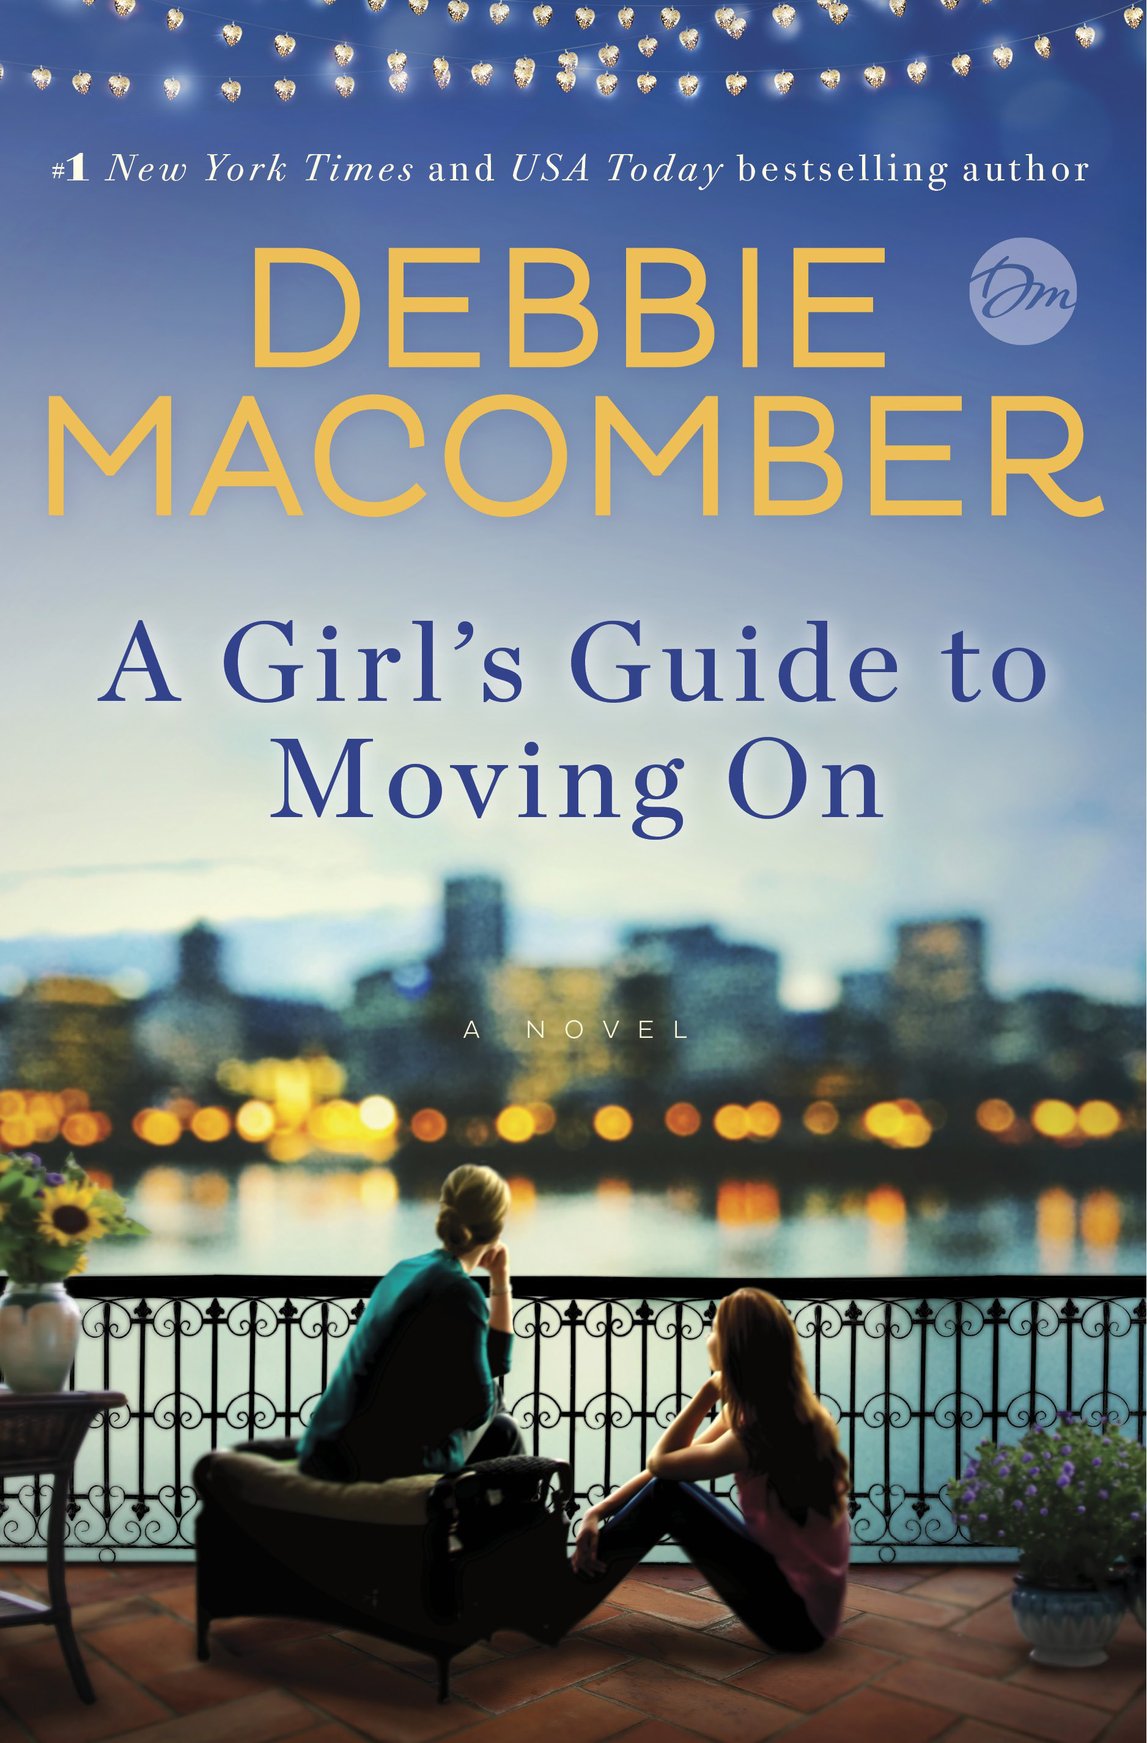 A Girl's Guide to Moving On (2016)